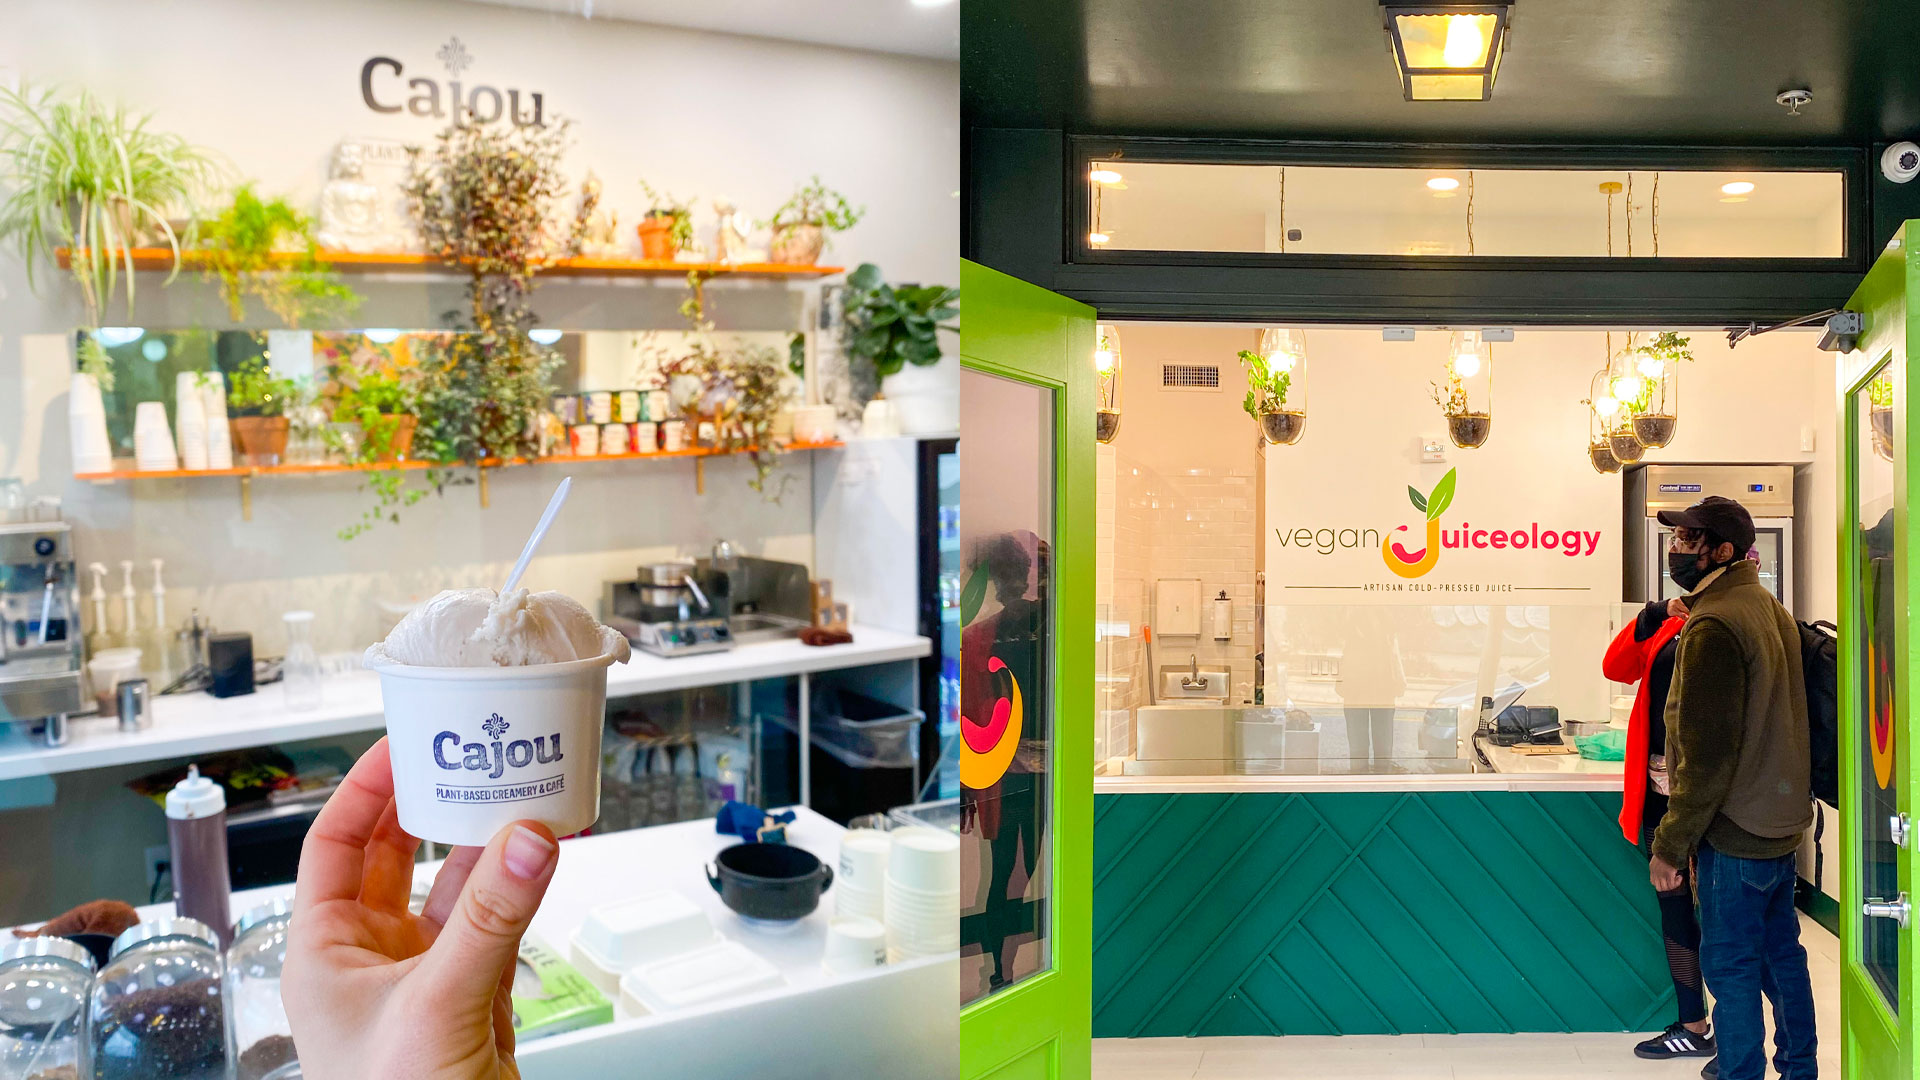 Cajou Creamery and Vegan Juiceology located on the 400 block of Howard street in Baltimore.